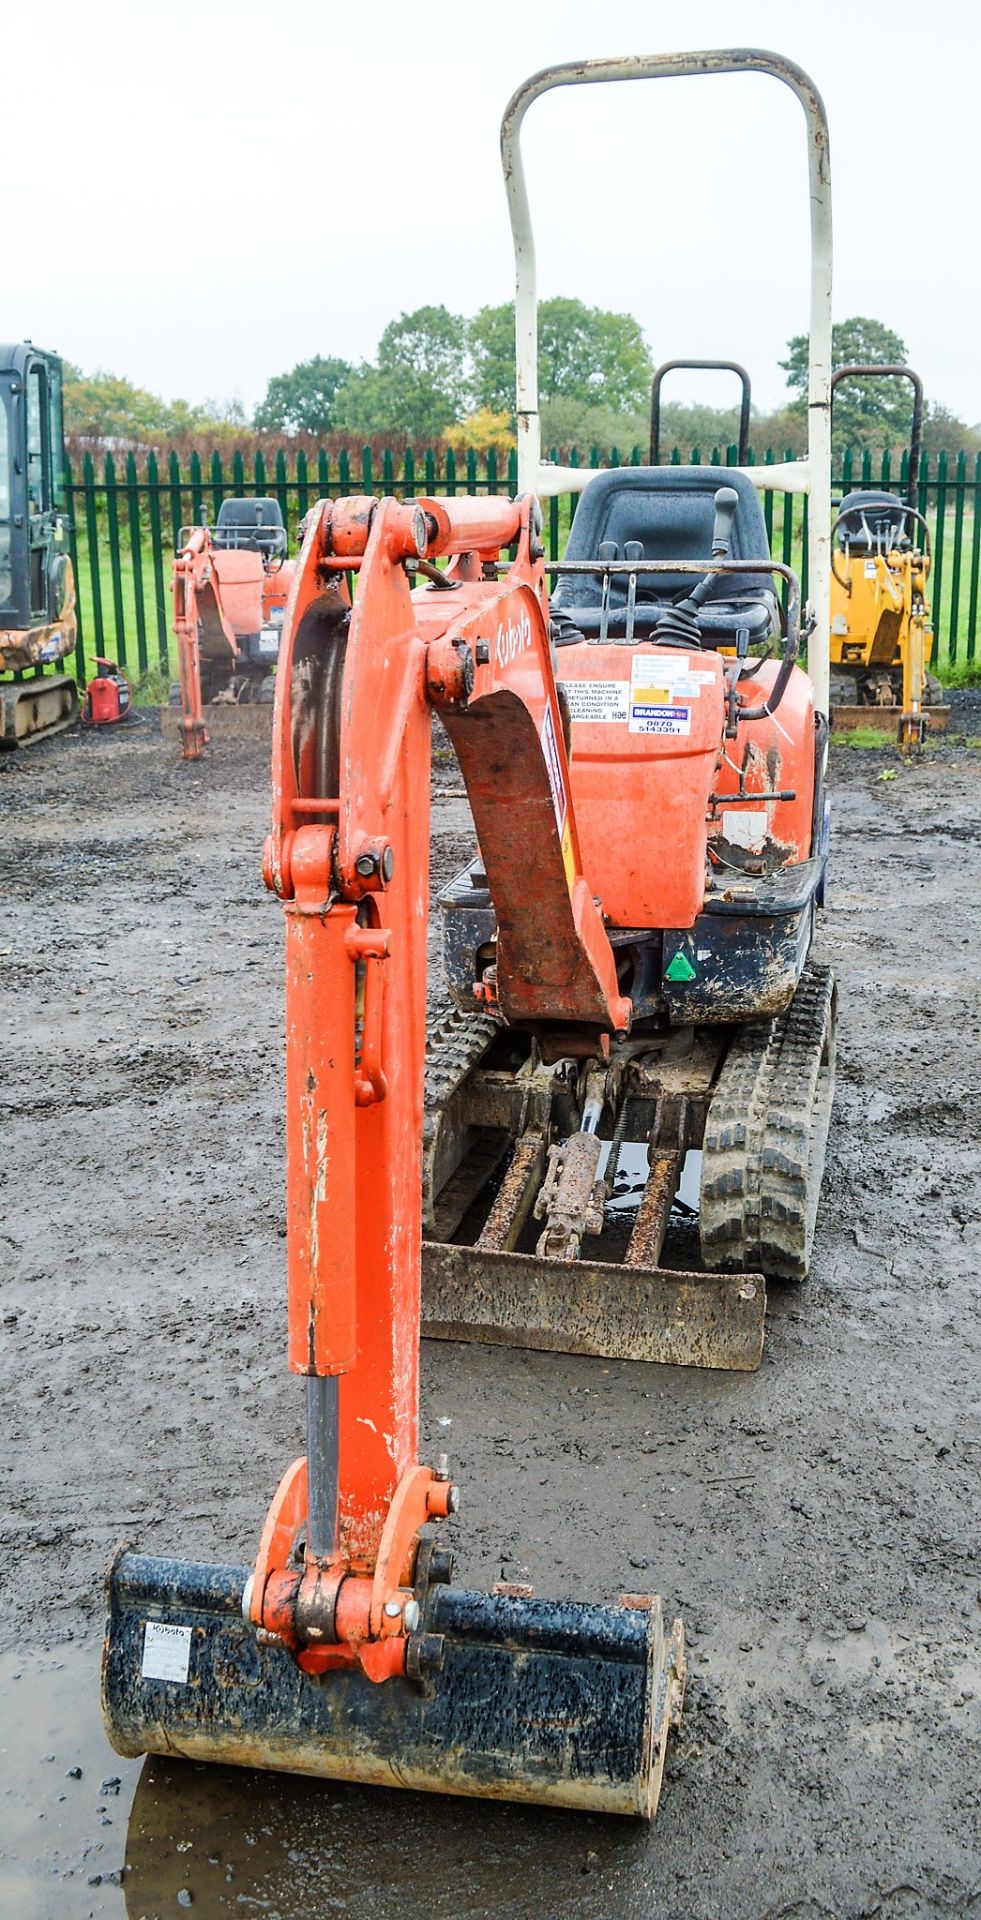 Kubota KX008-3 850 kg rubber tracked micro excavator Year: 2004 S/N: 12445 Recorded Hours: 4414 - Image 5 of 10